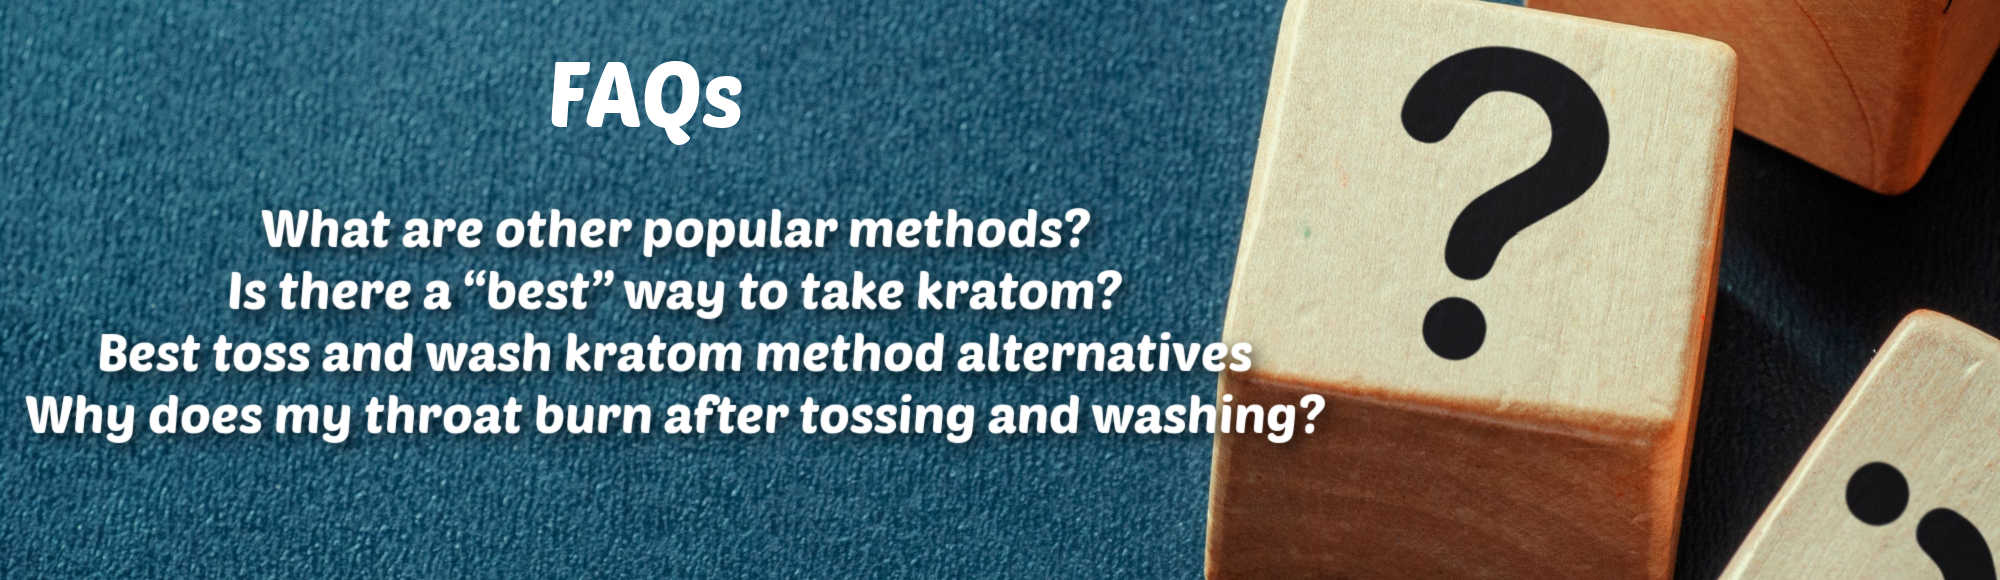 image of faqs about toss and wash kratom method